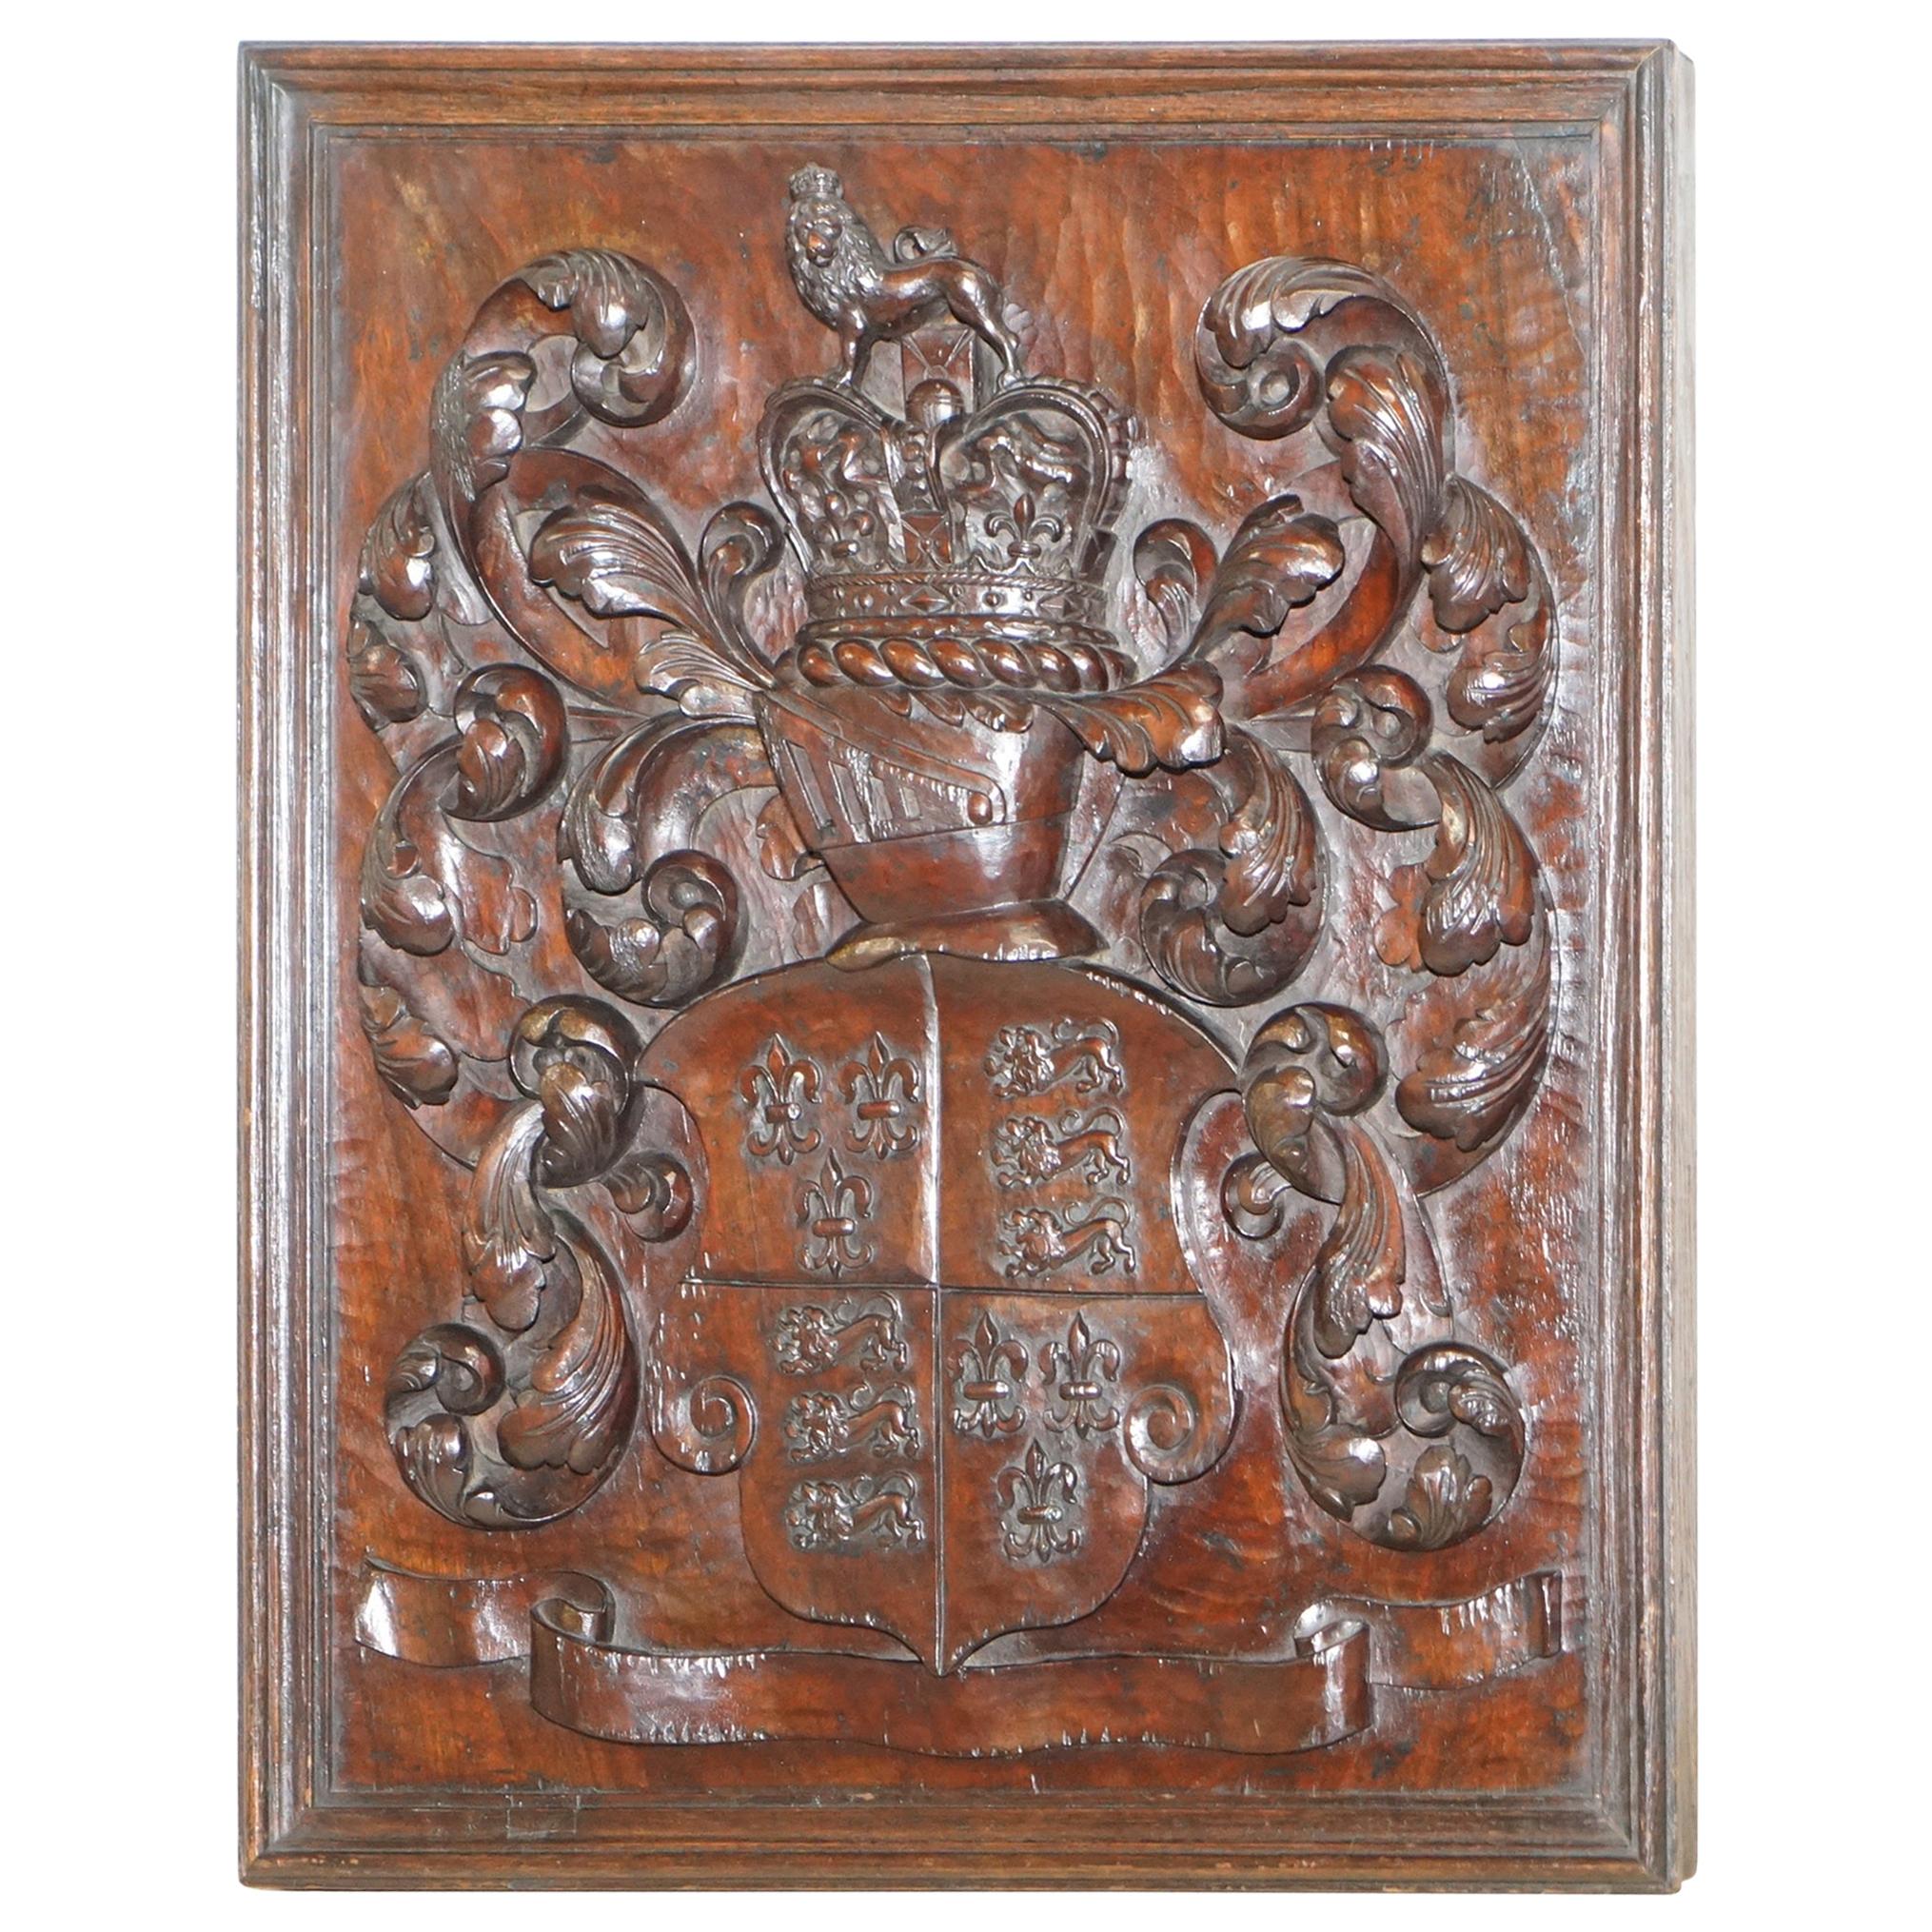 RARE ANTiQUE 1405-1603 ENGLISH ROYAL COAT OF ARMS ARMORIAL CREST CARVED WALNUT